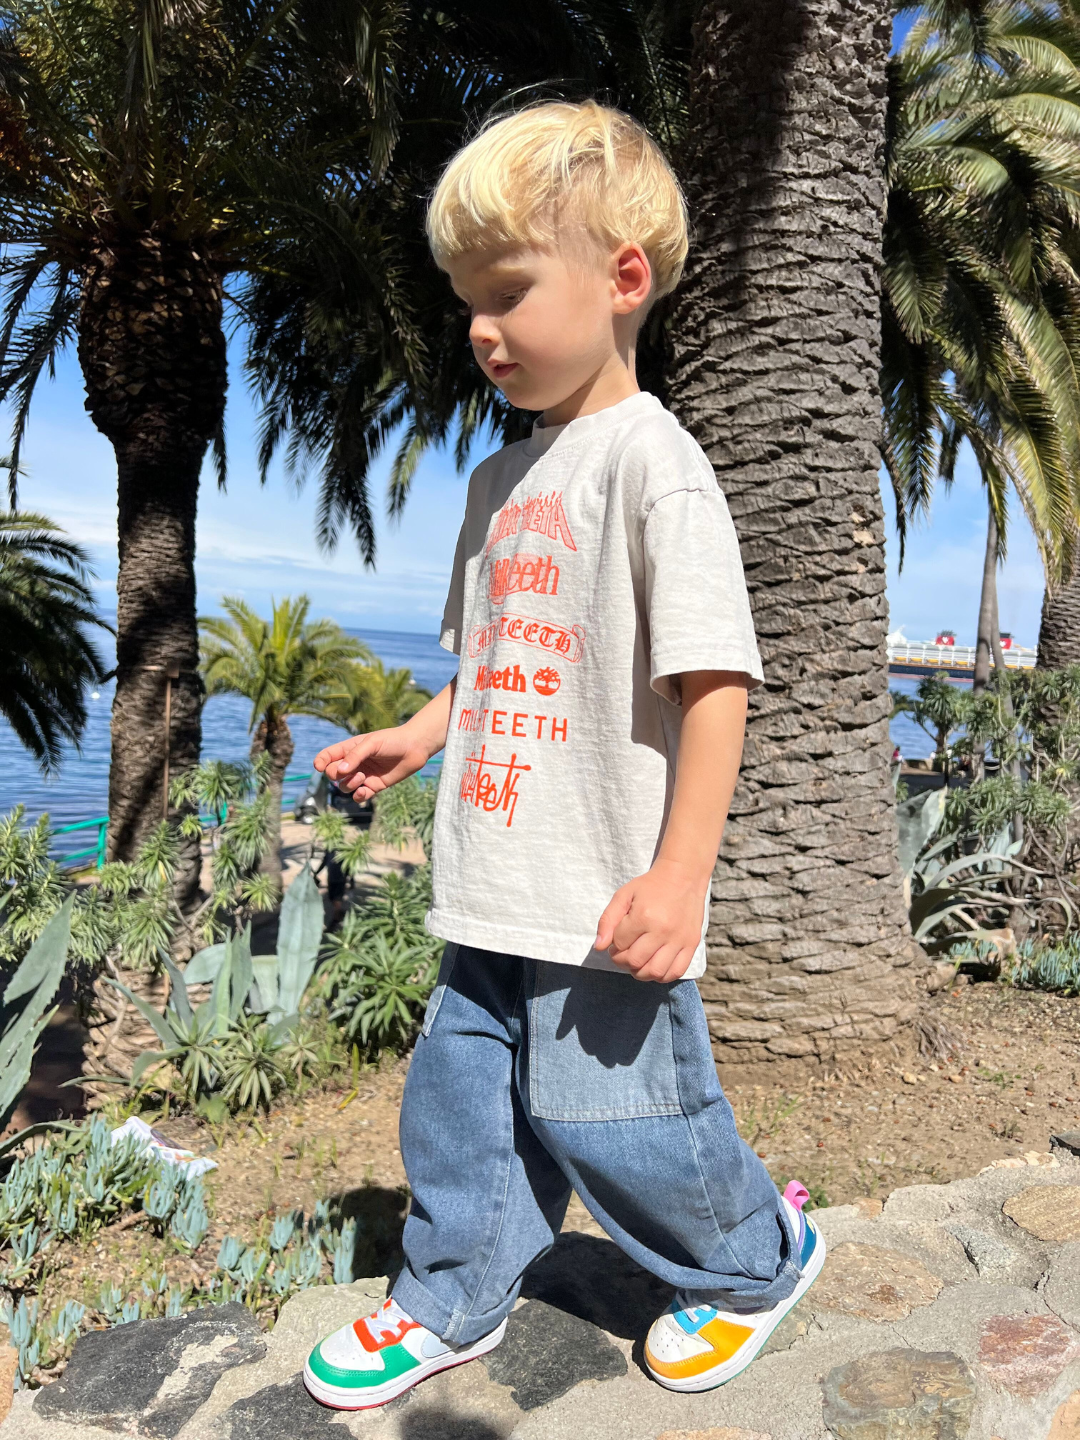 Cement | A child wearing the Cease and Desist tee in cement, with baggy jeans in medium blue denim with lighter blue patch pockets. They have short blond hai. The light grey tshirt has orange Milk teeth lettering, and he also wears white sneakers with colorful trim, walking on a stone wall with palm trees, the ocean and blue sky in the background.